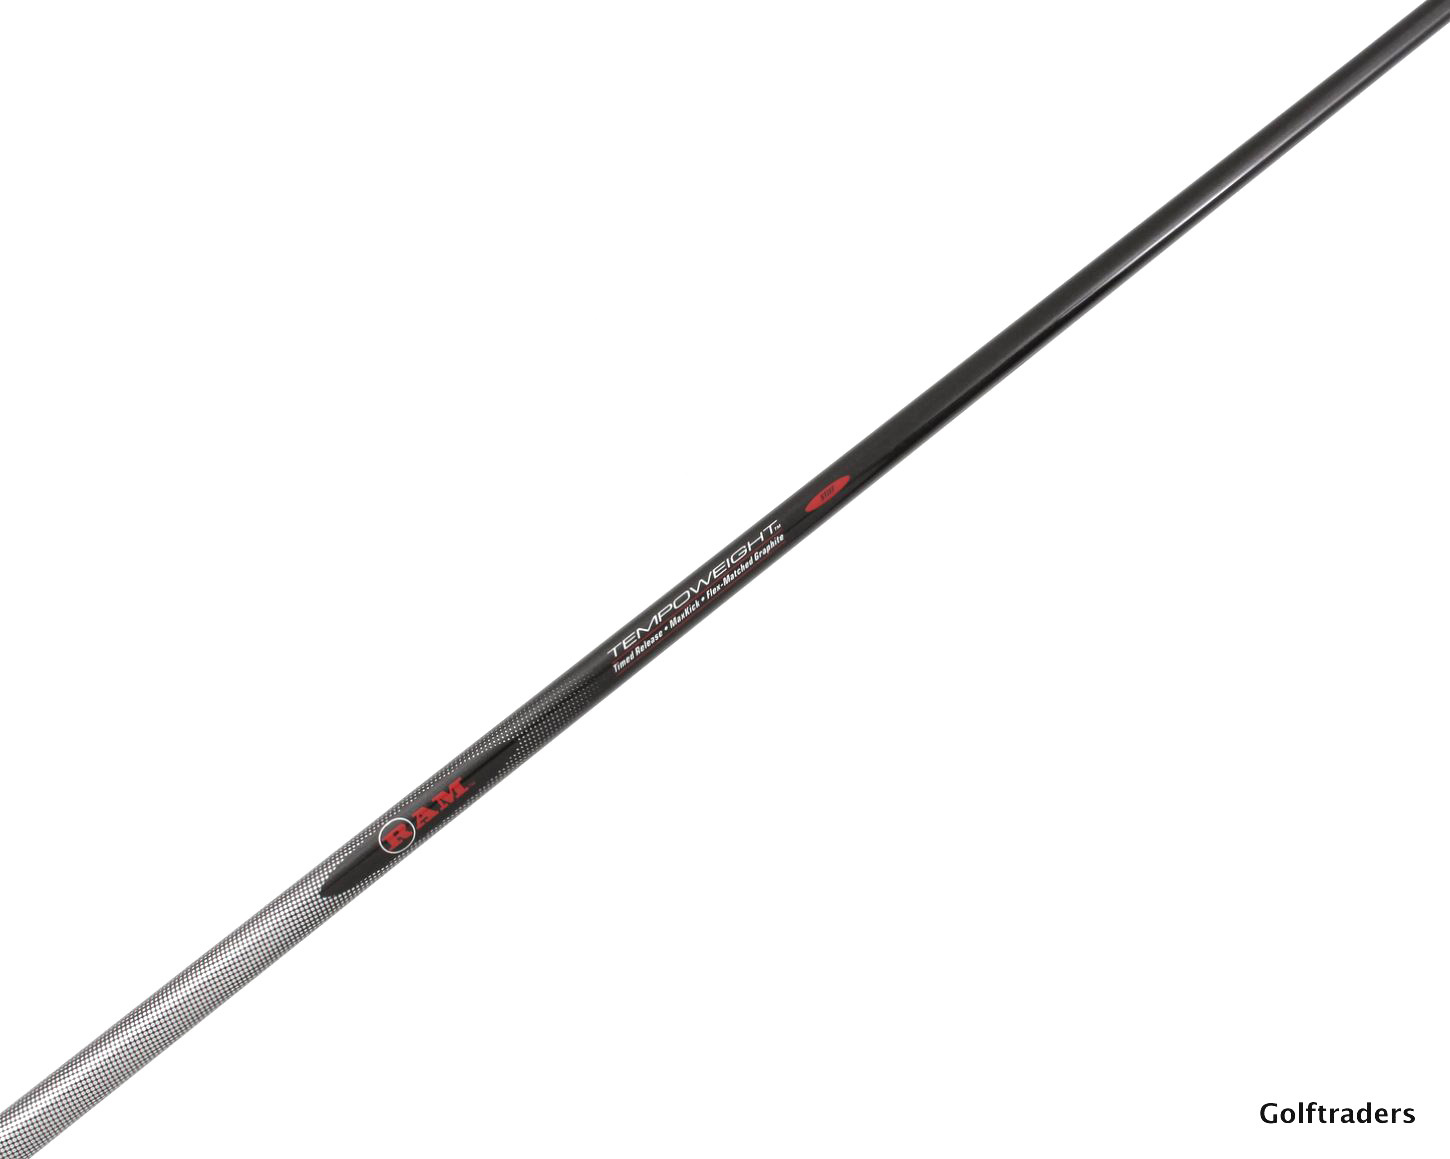 BUY GOLF SHAFTS ONLINE, USED AND NEW